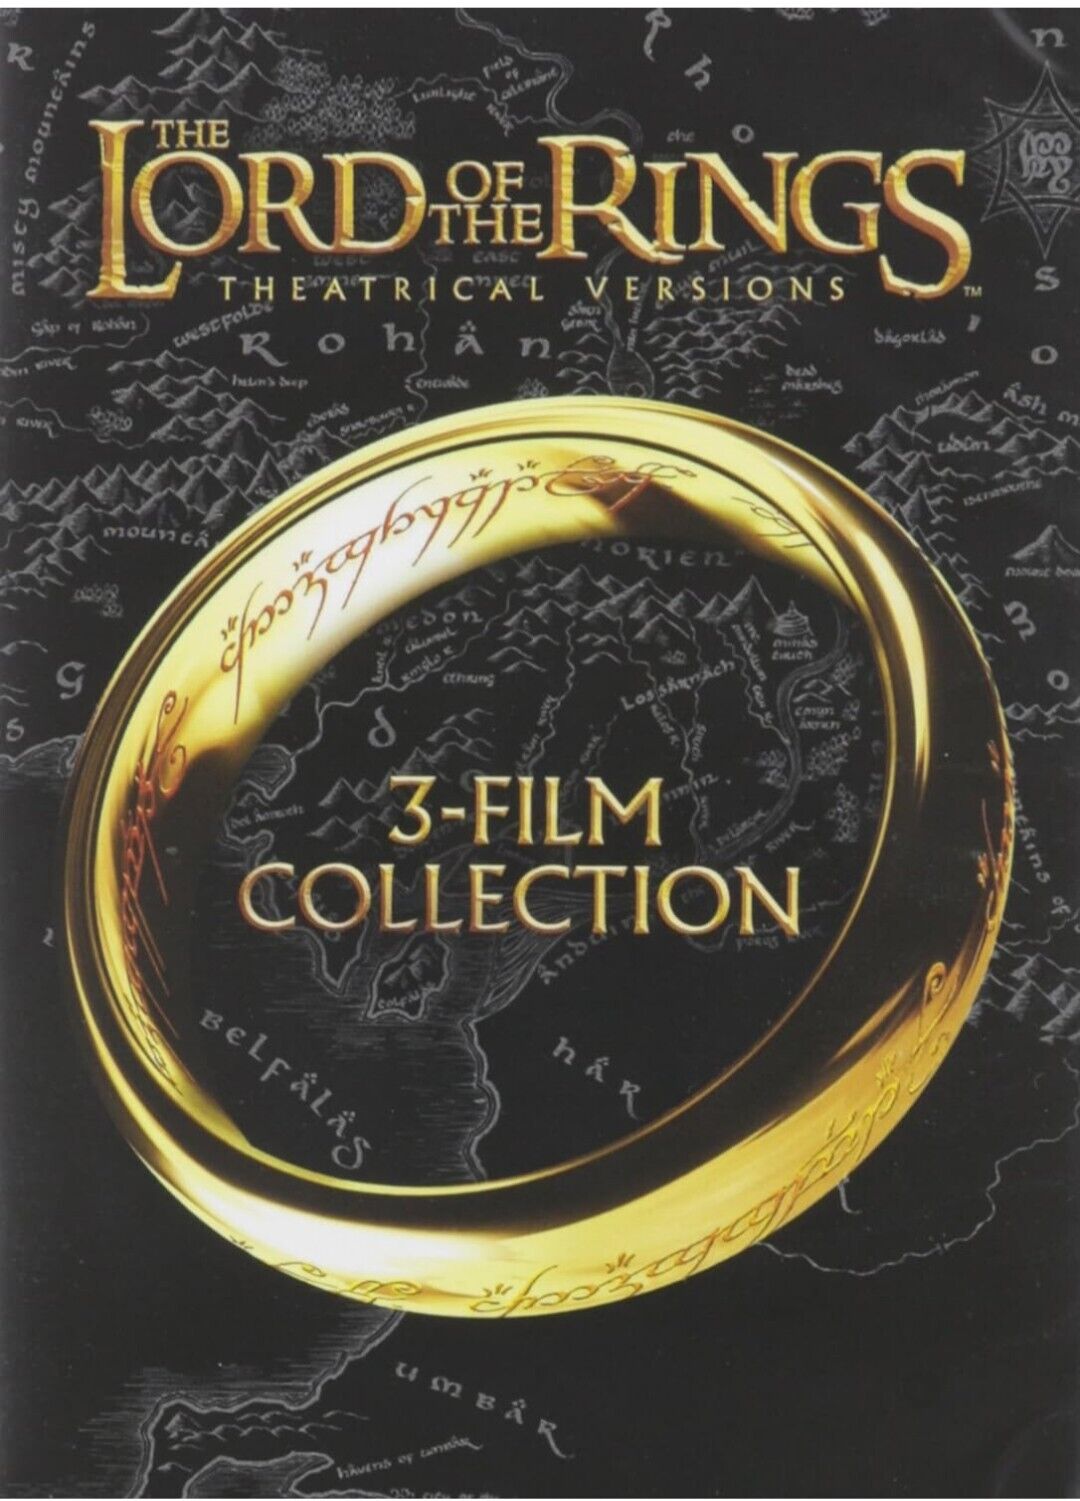 Lord of the Rings: 3-Film Collection (Theatrical Versions)